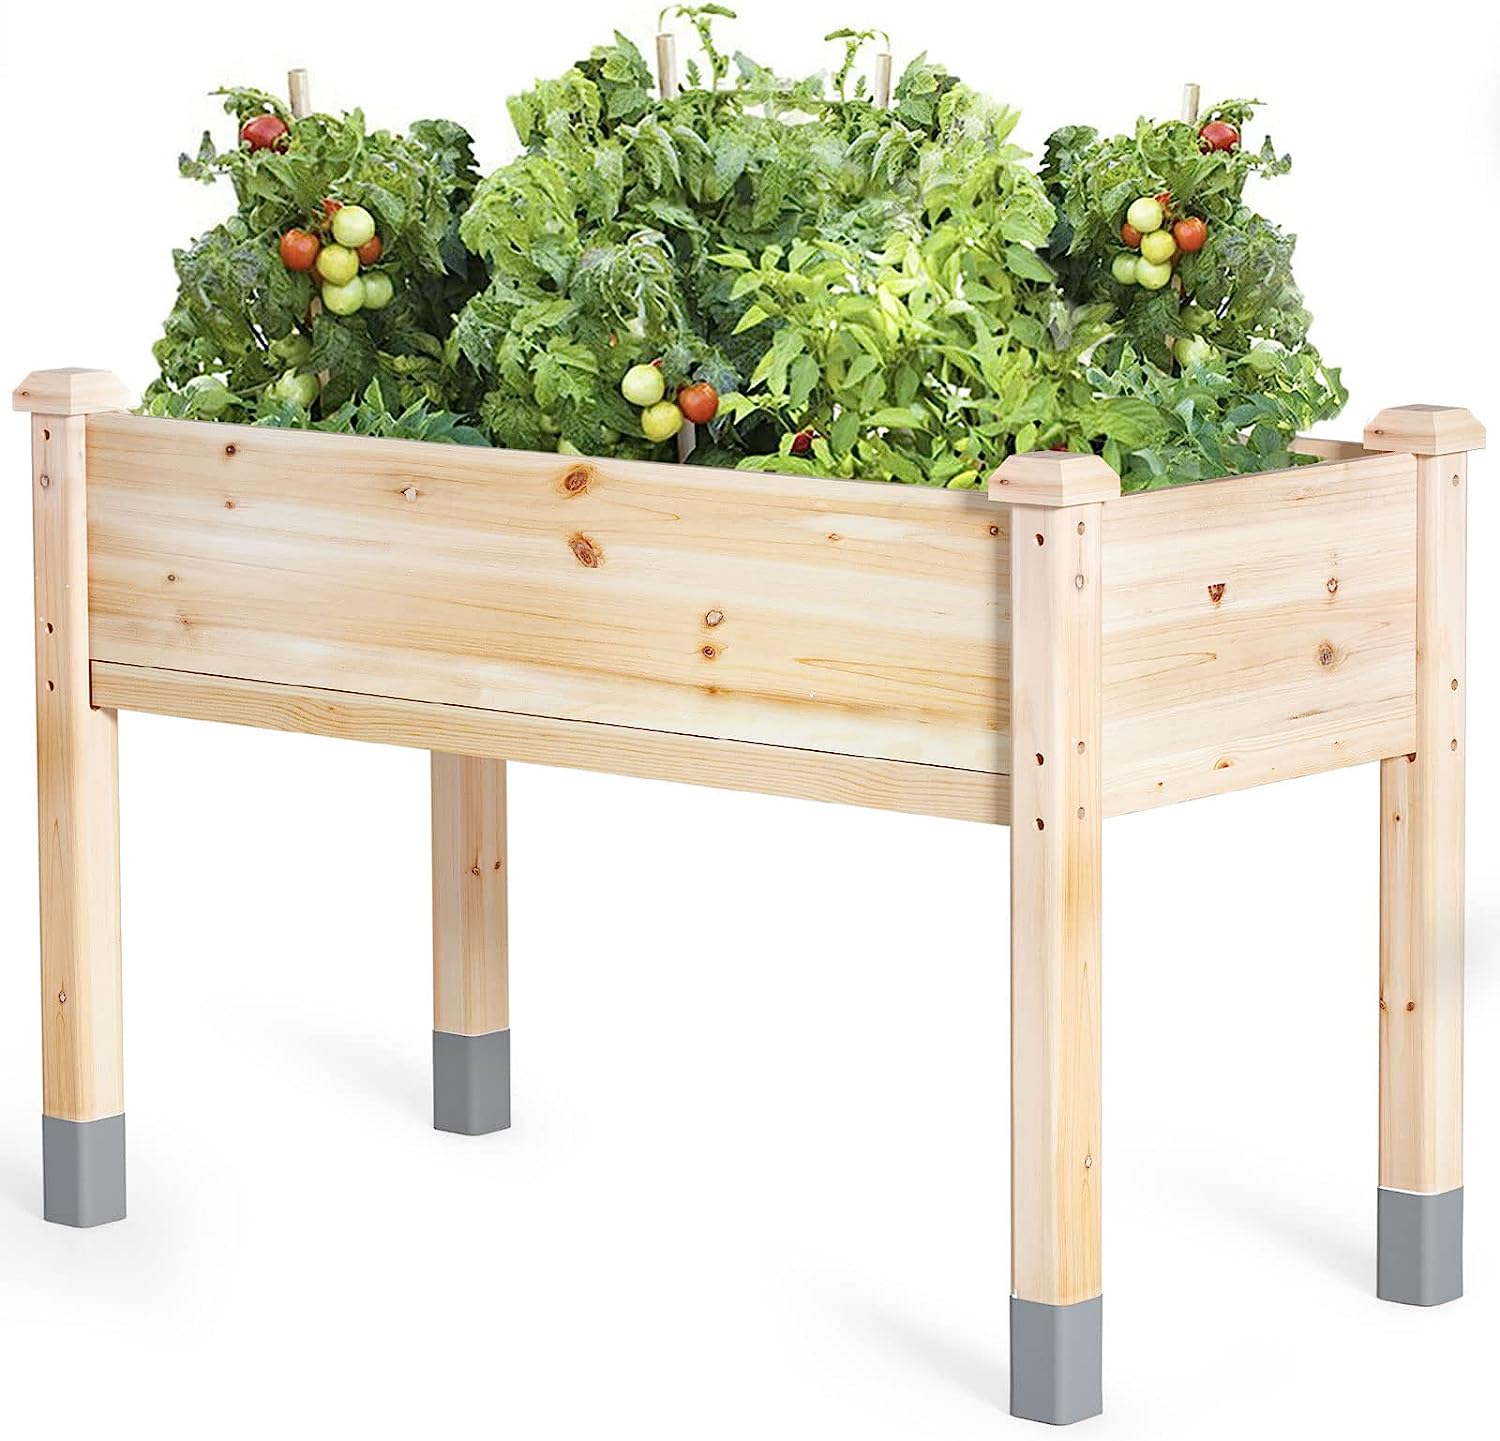 MIXC Wooden Raised Garden Bed with Legs, 48”L X 24”W, [...]